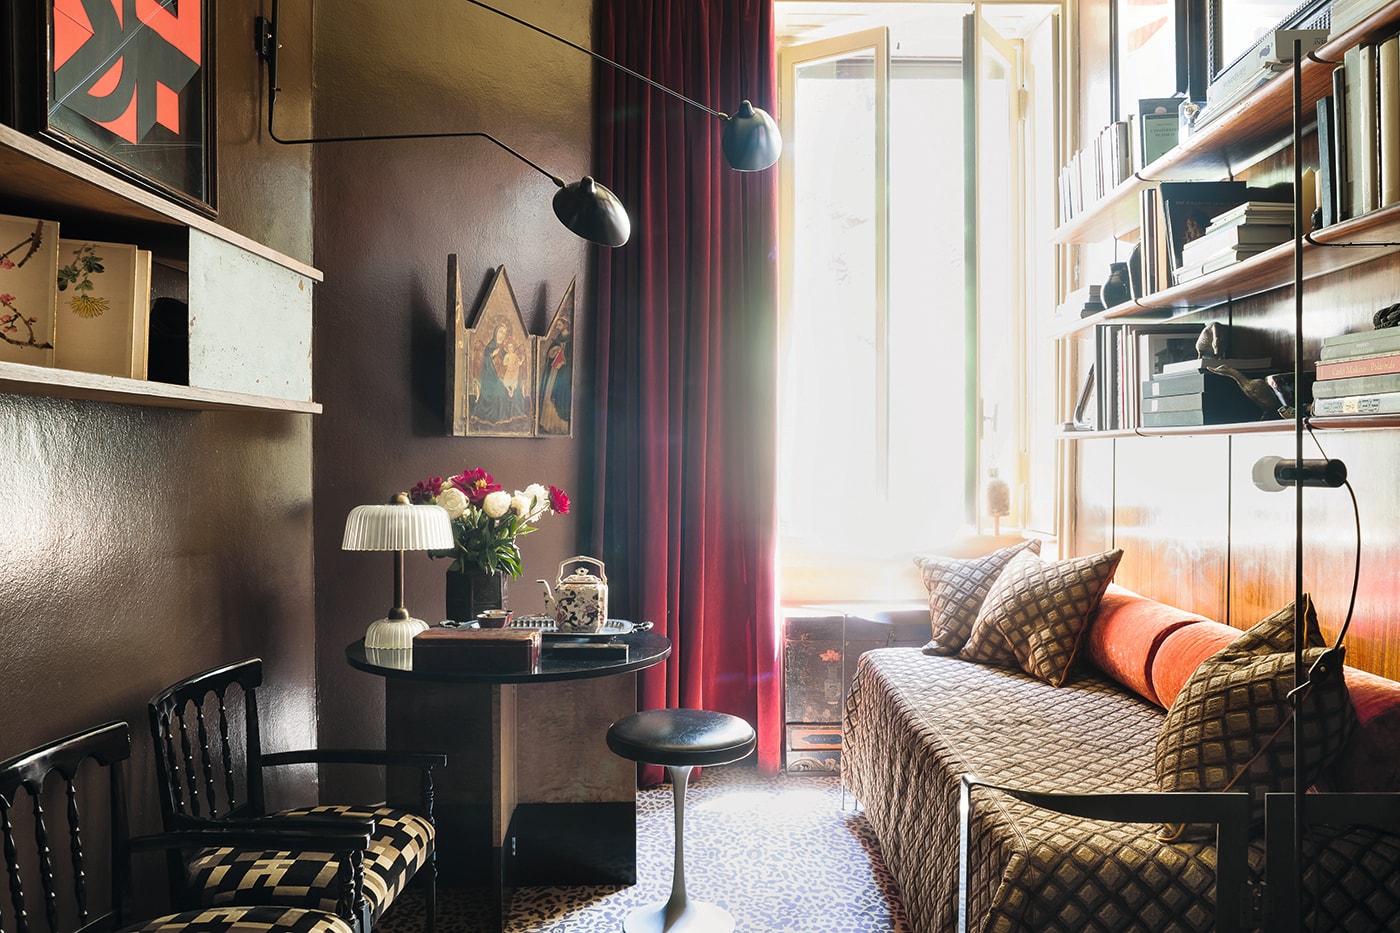 Take a Look Inside the Homes of Some of the World's Biggest Designers